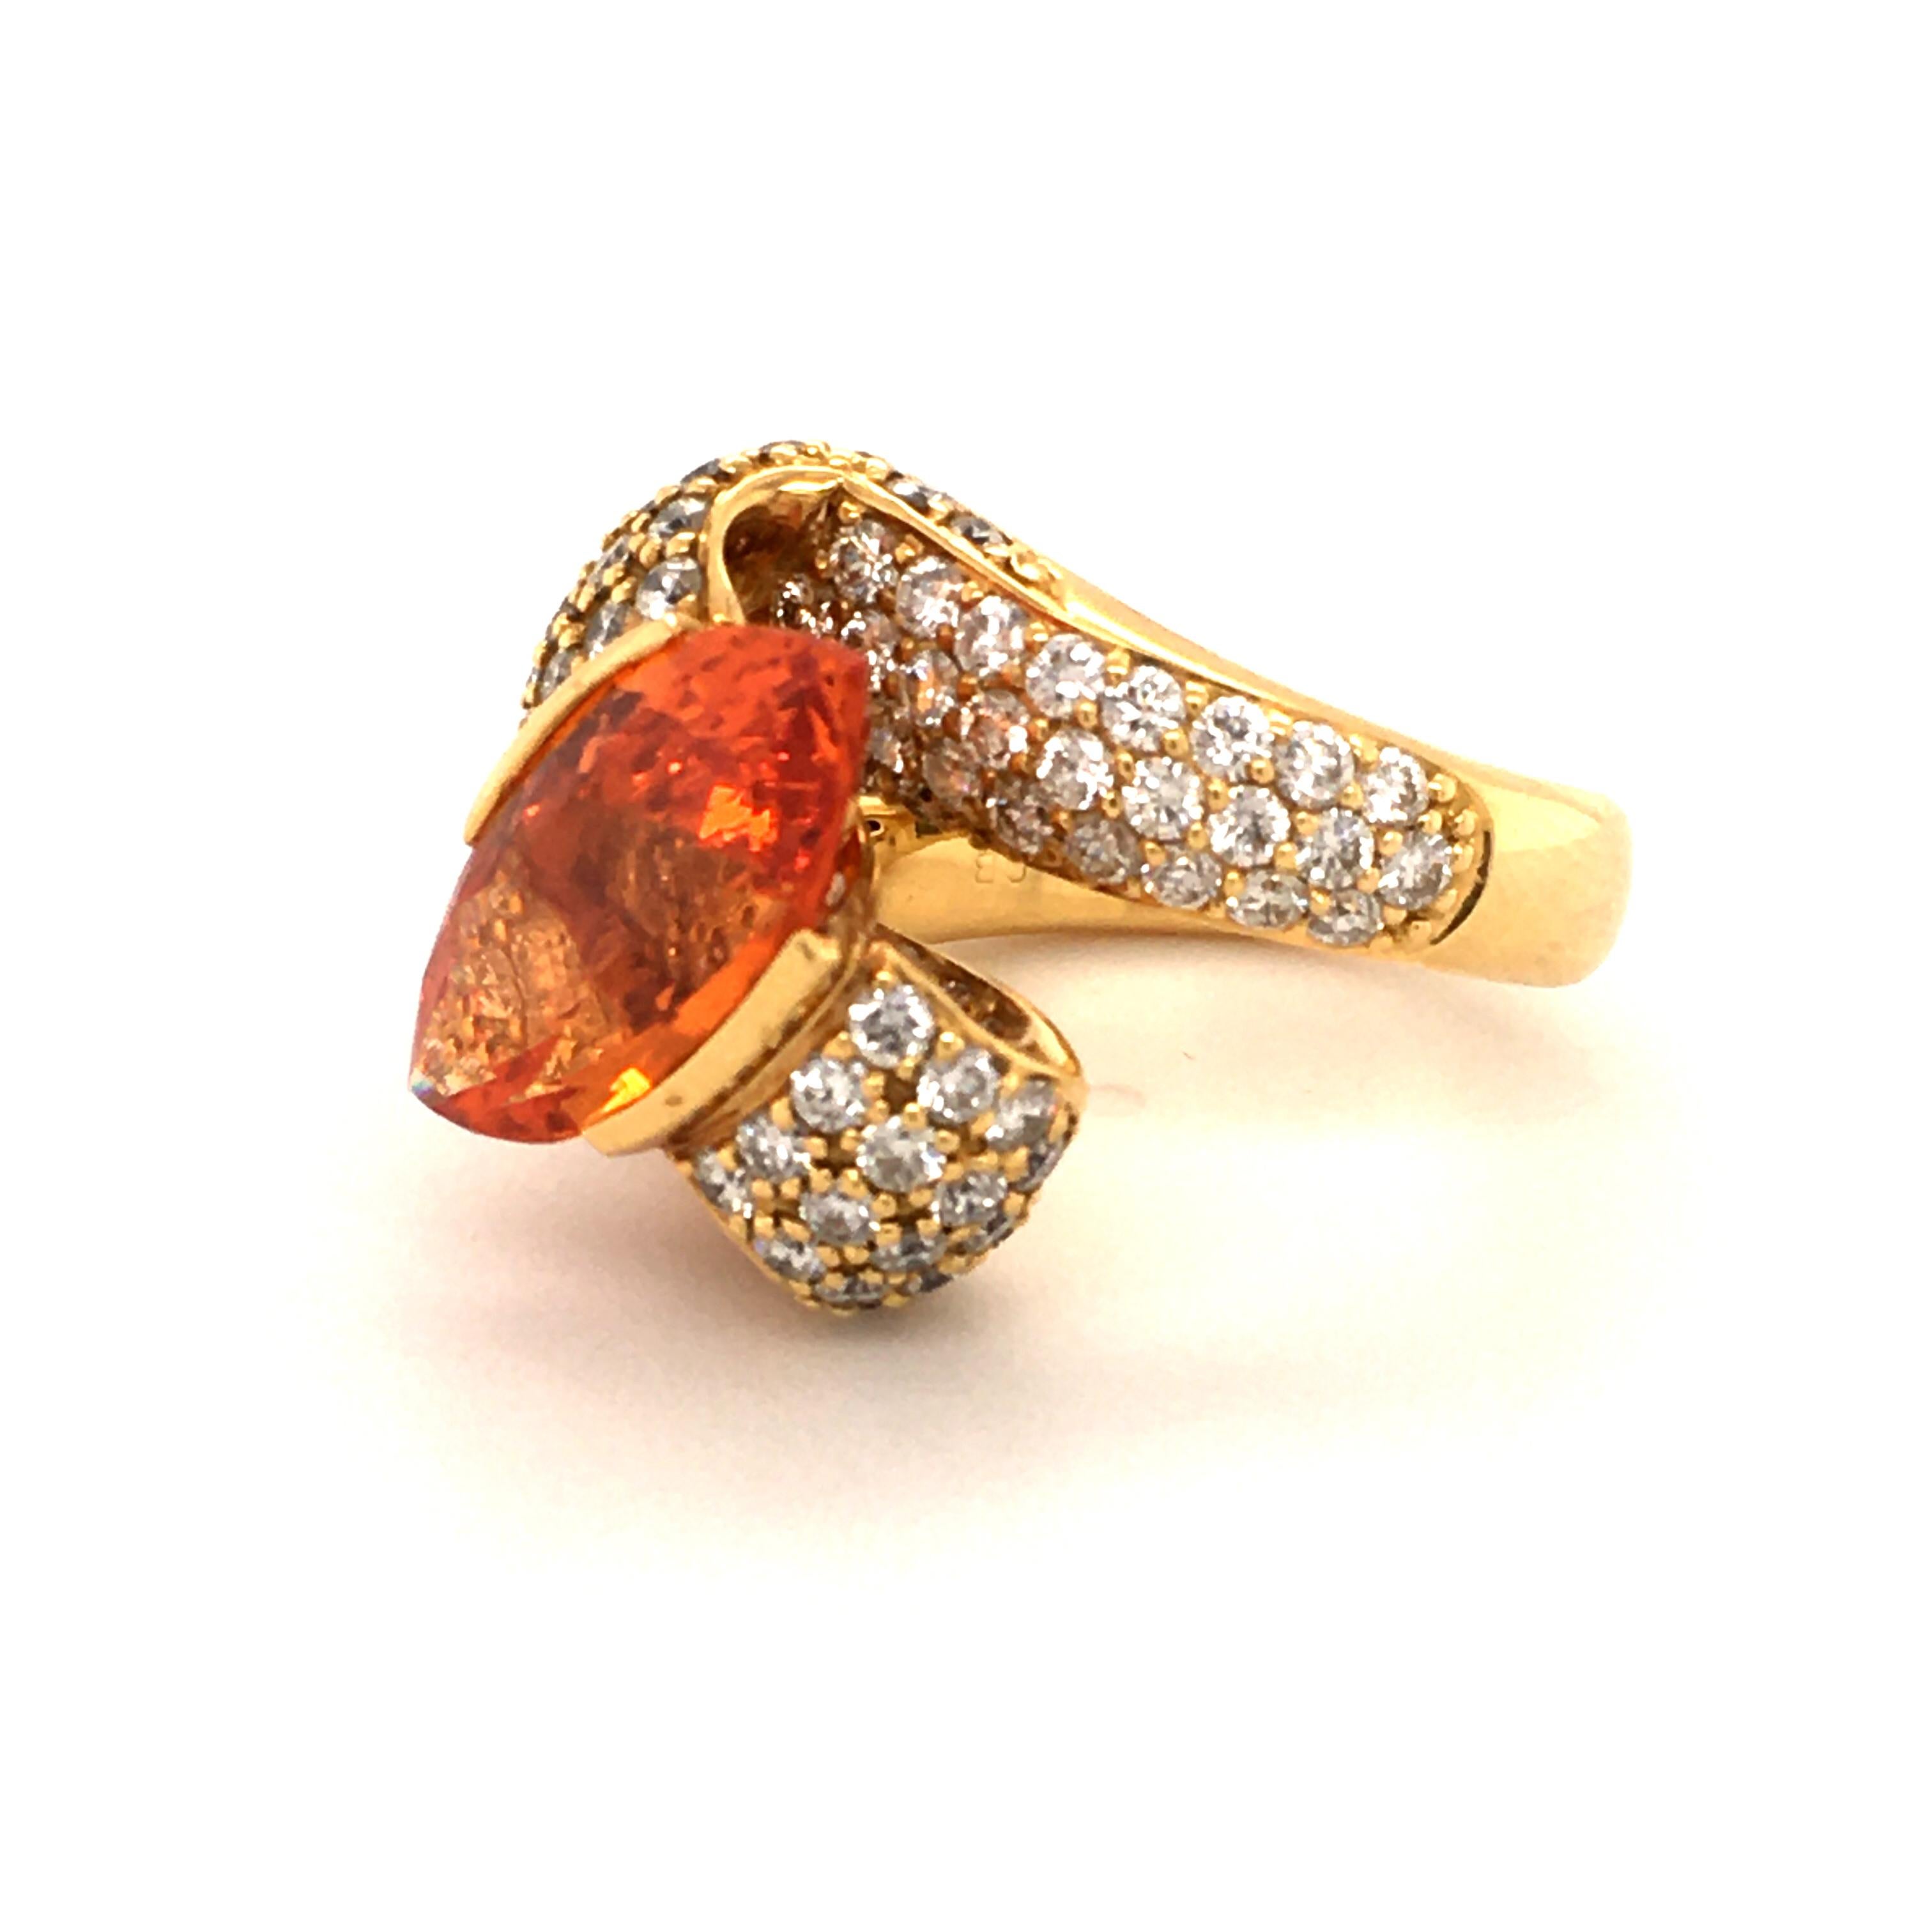 This elegantly curved ring sets the focus on a brightly colored marquise-cut spessartine garnet of 6.68 carat. Carefully handcrafted setting in yellow gold 750 with 104 brilliants of G/H color and vs clarity, totalling 2.98 ct.

Size: 55.5 / US 7